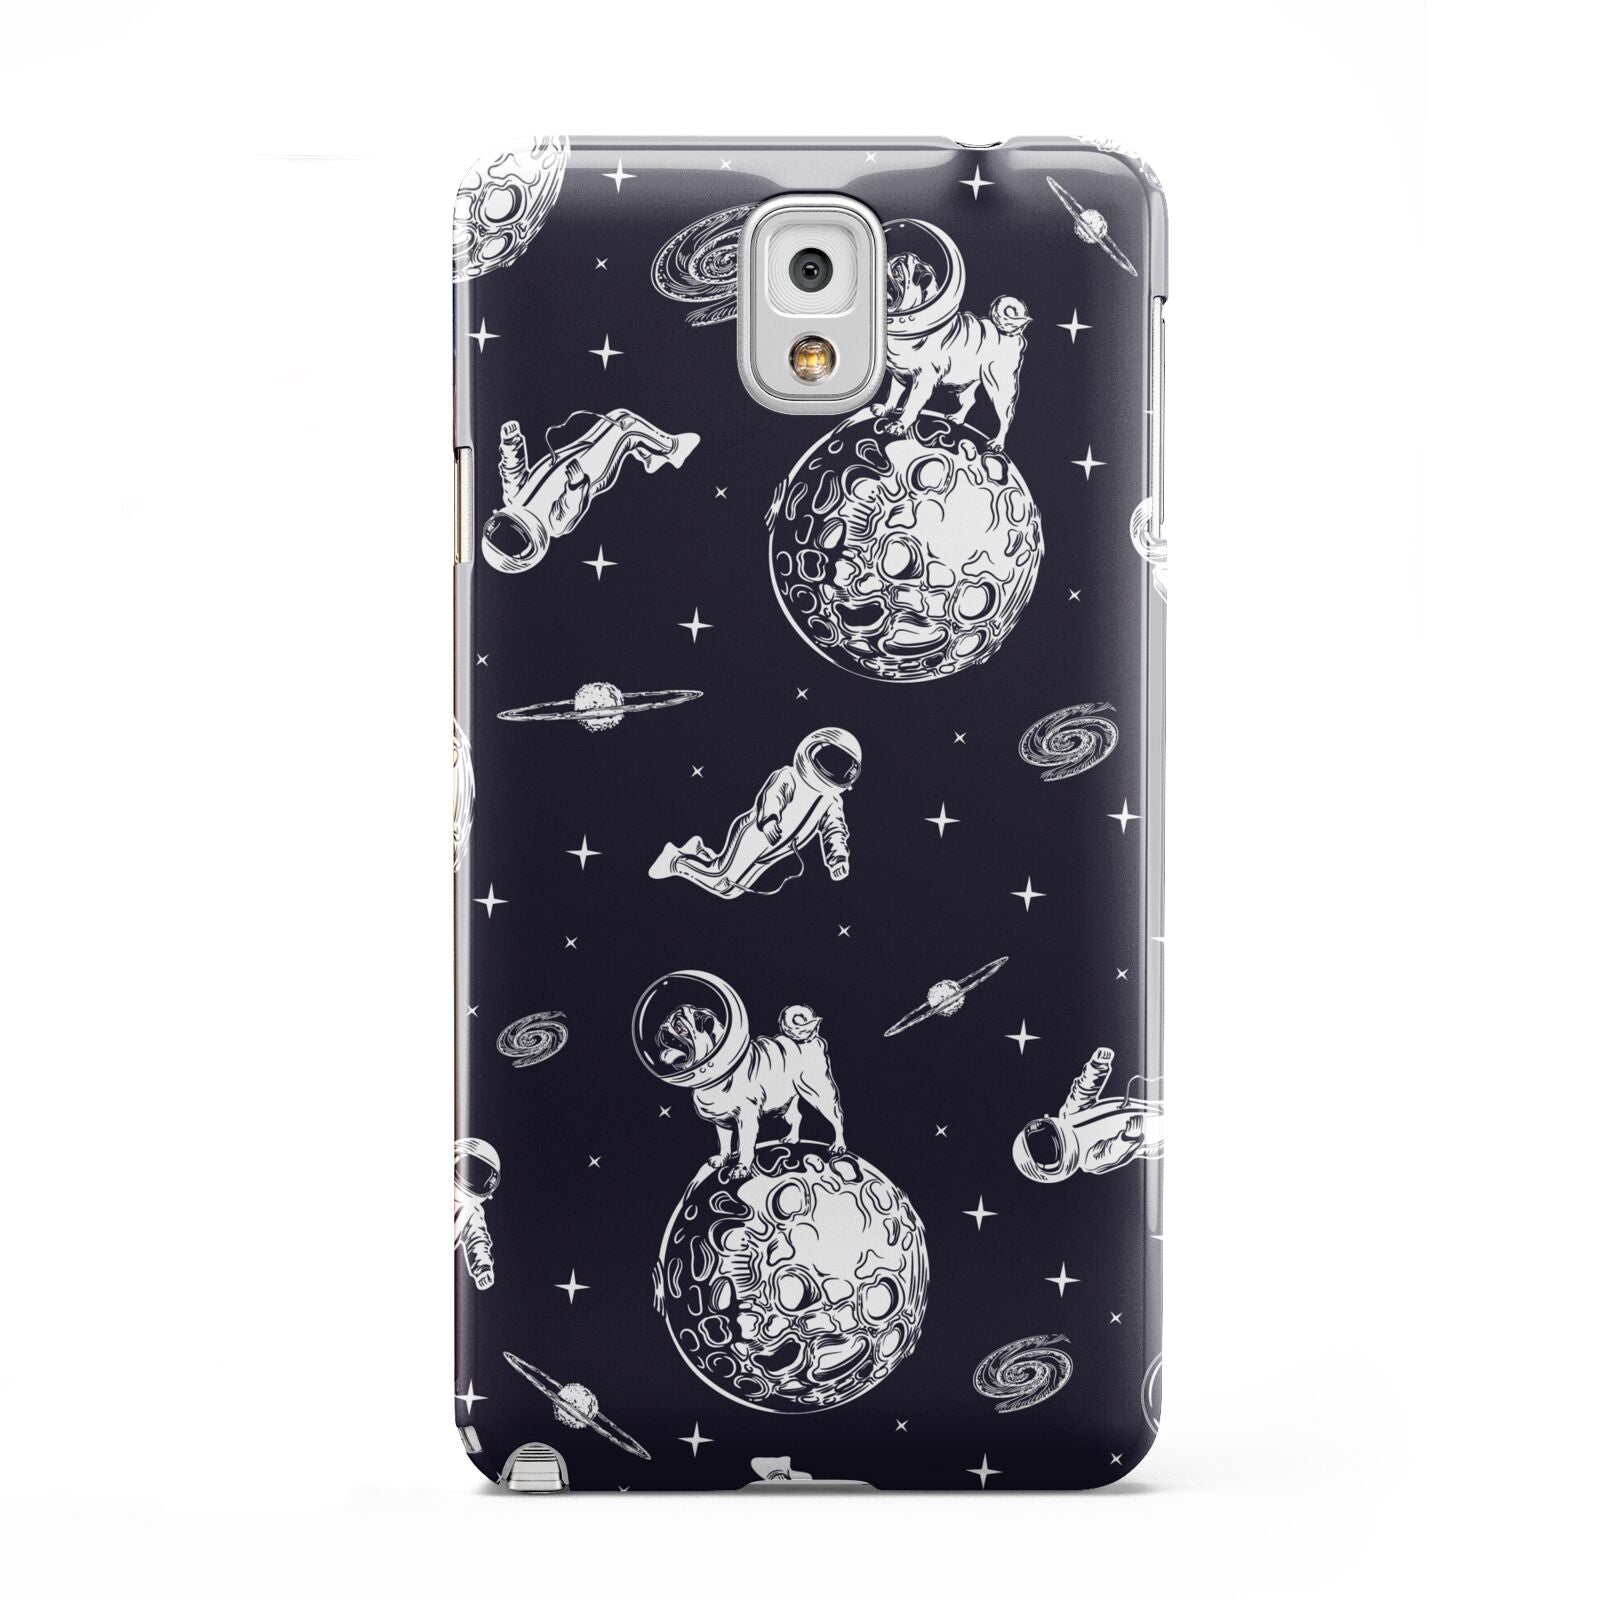 Pug in Space Samsung Galaxy Note 3 Case